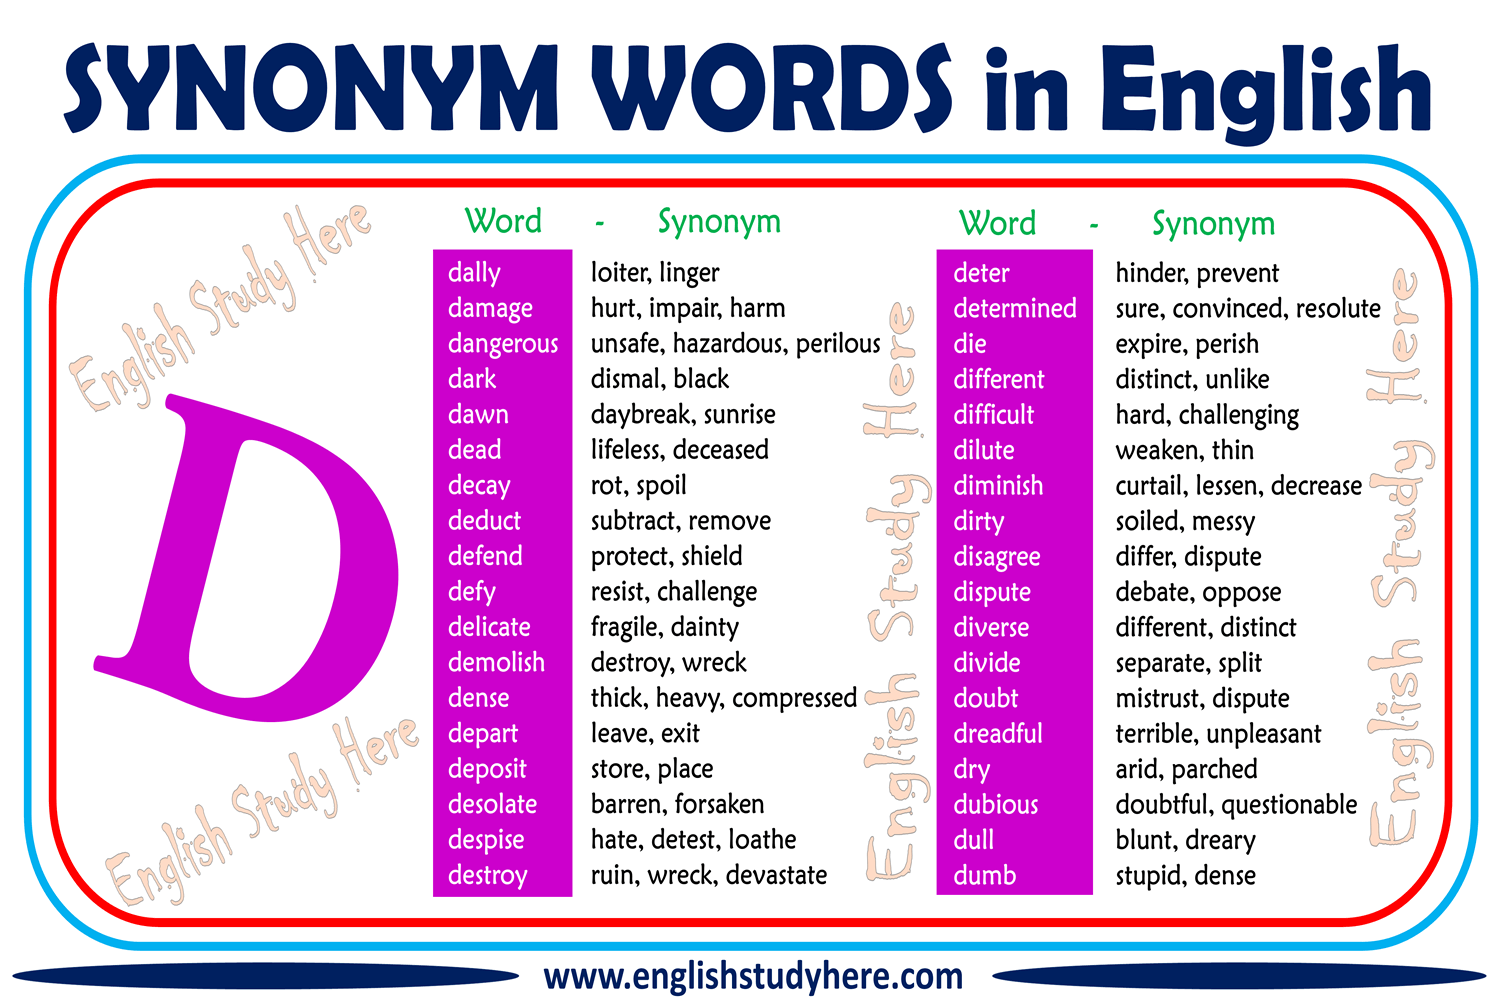 Synonym Words With D in English - English Study Here
